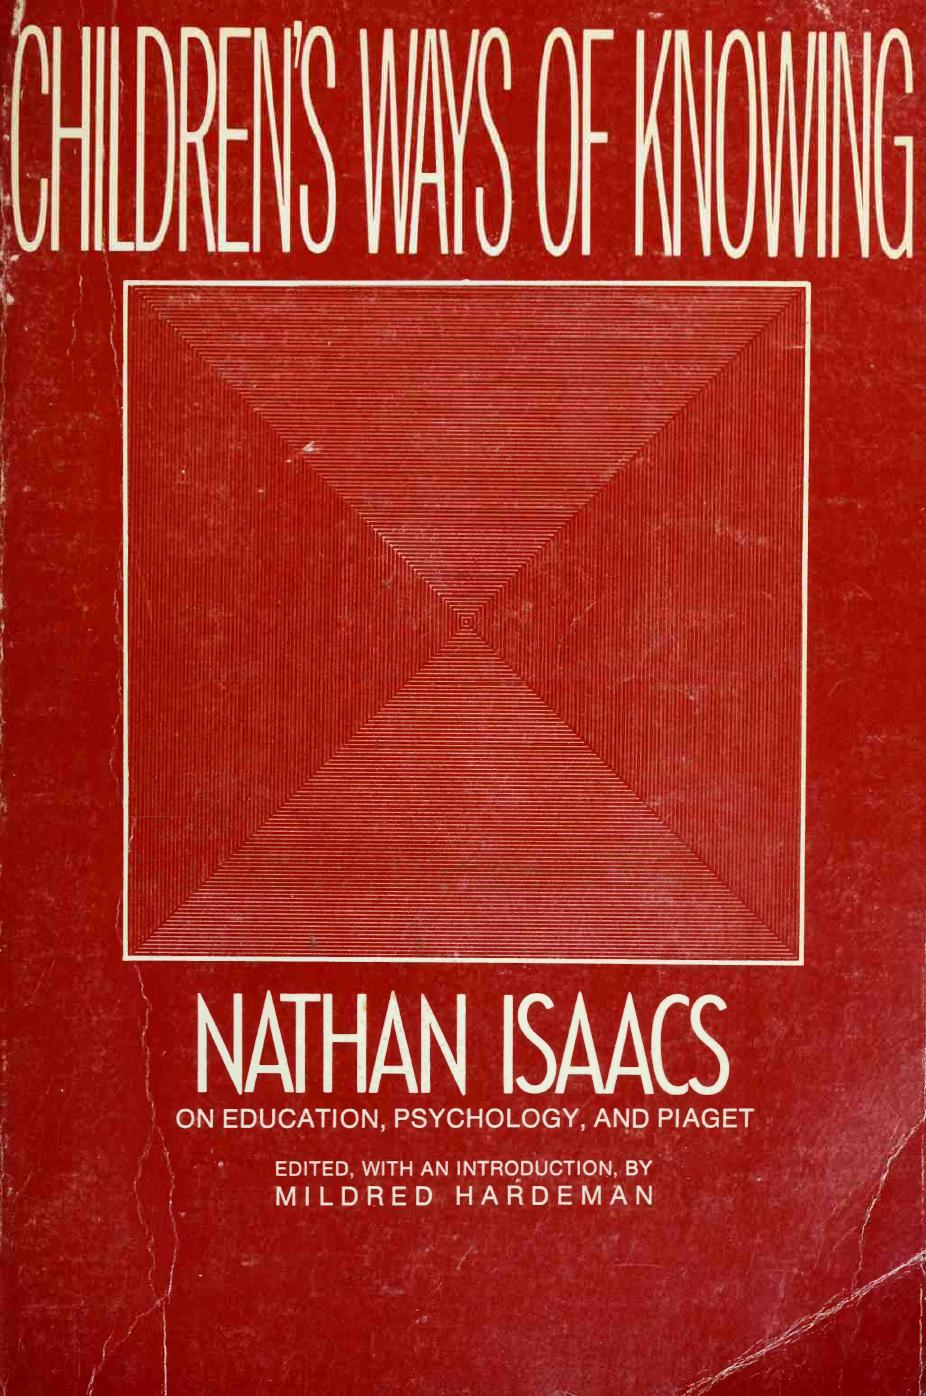 Children's Ways of Knowing: Nathan Isaacs on Education, Psychology, and Piaget